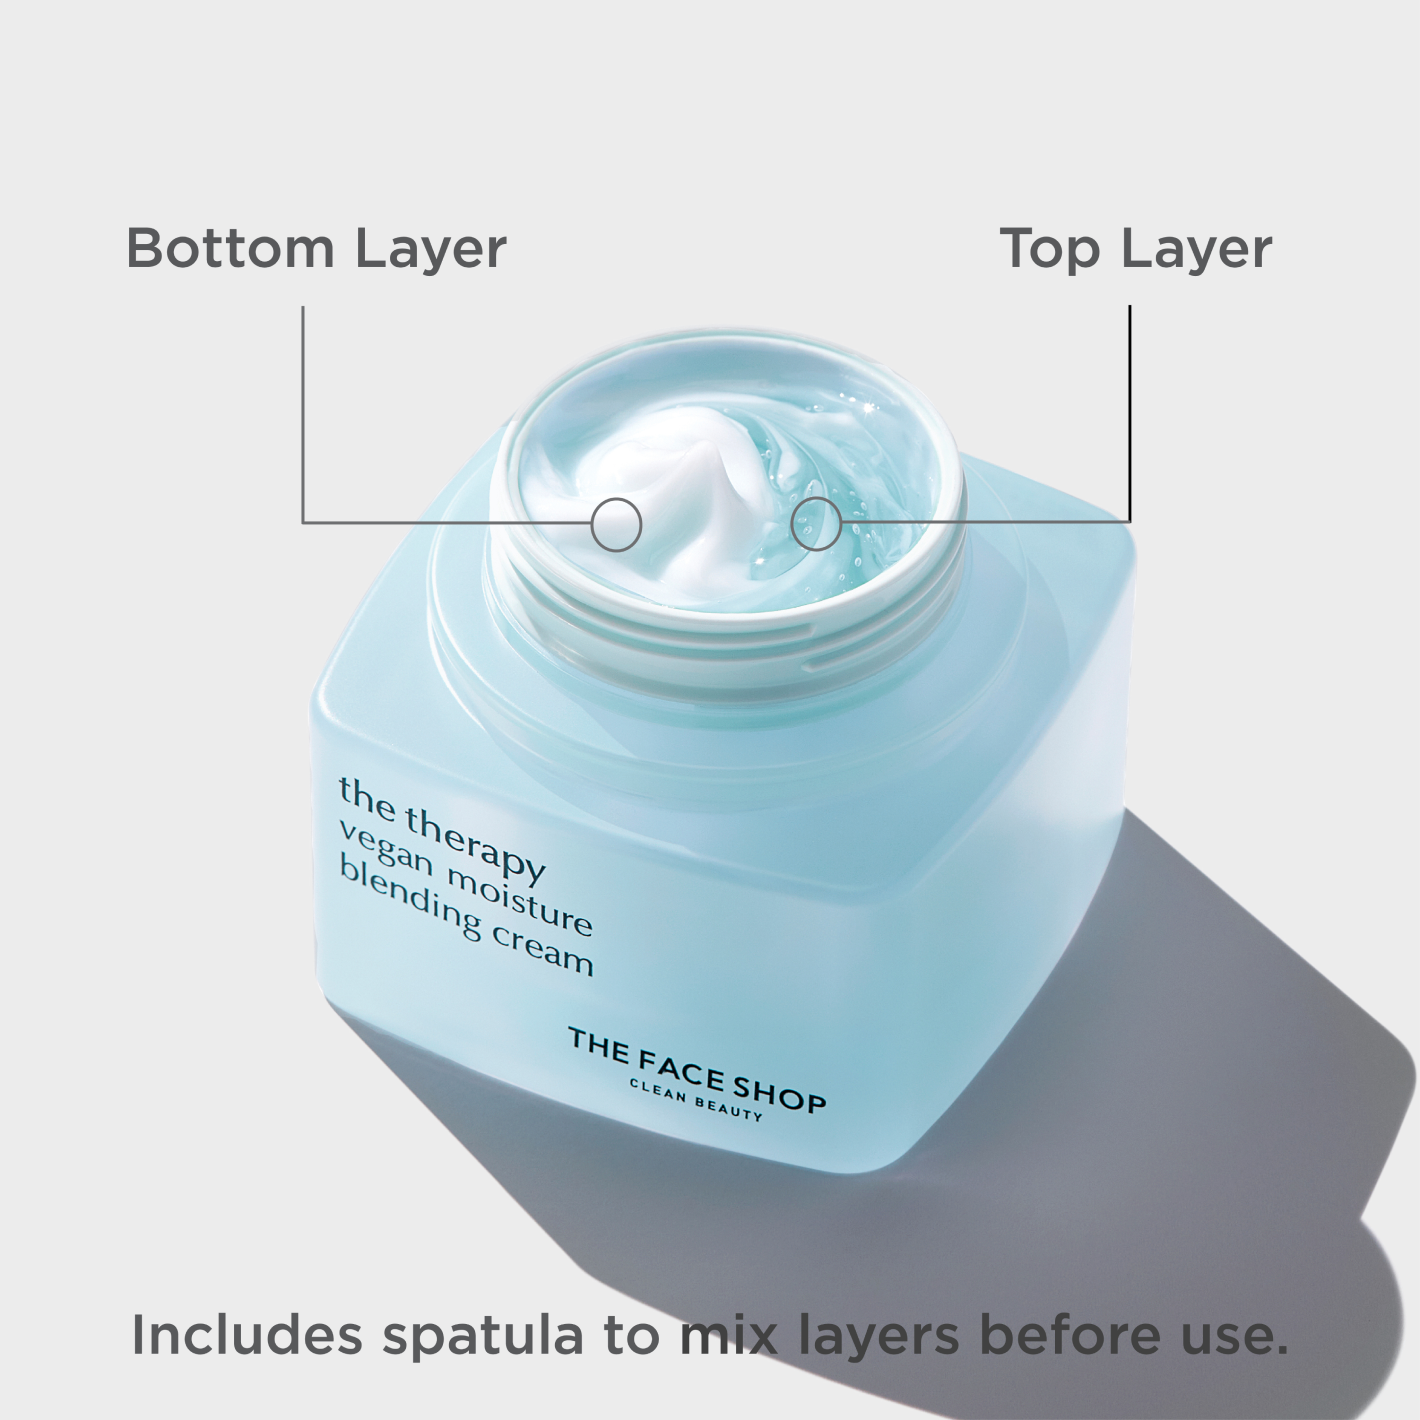 A light blue jar of The Face Shop Vegan Moisture Blending Cream with the lid opened showing the cream texture and three indicators pointing at the Bottom layer texture, and at the Top layer texture, as well as a disclaimer that says "Includes spatula to mix layers before use".